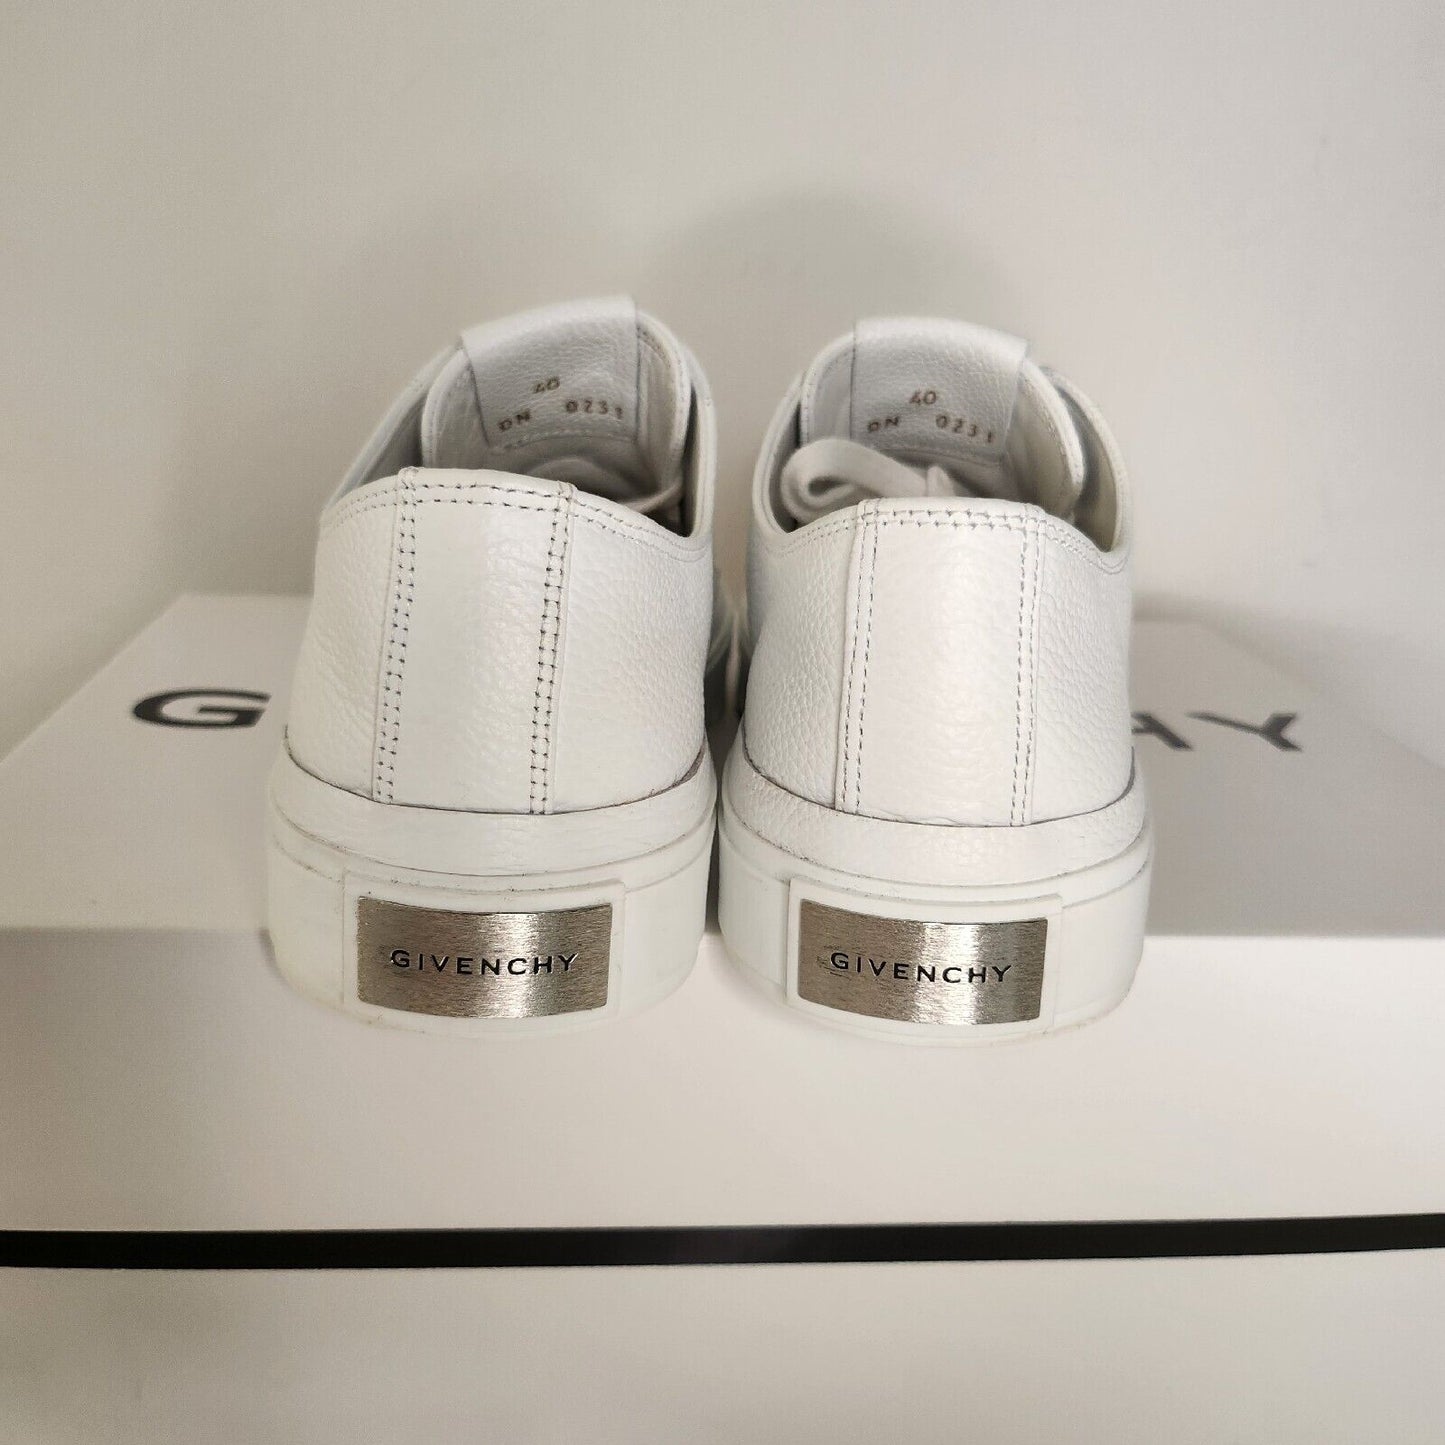 Givenchy City Low Sneakers White : BE001NE145 10040 (Size Euro 40/UK 6.5)